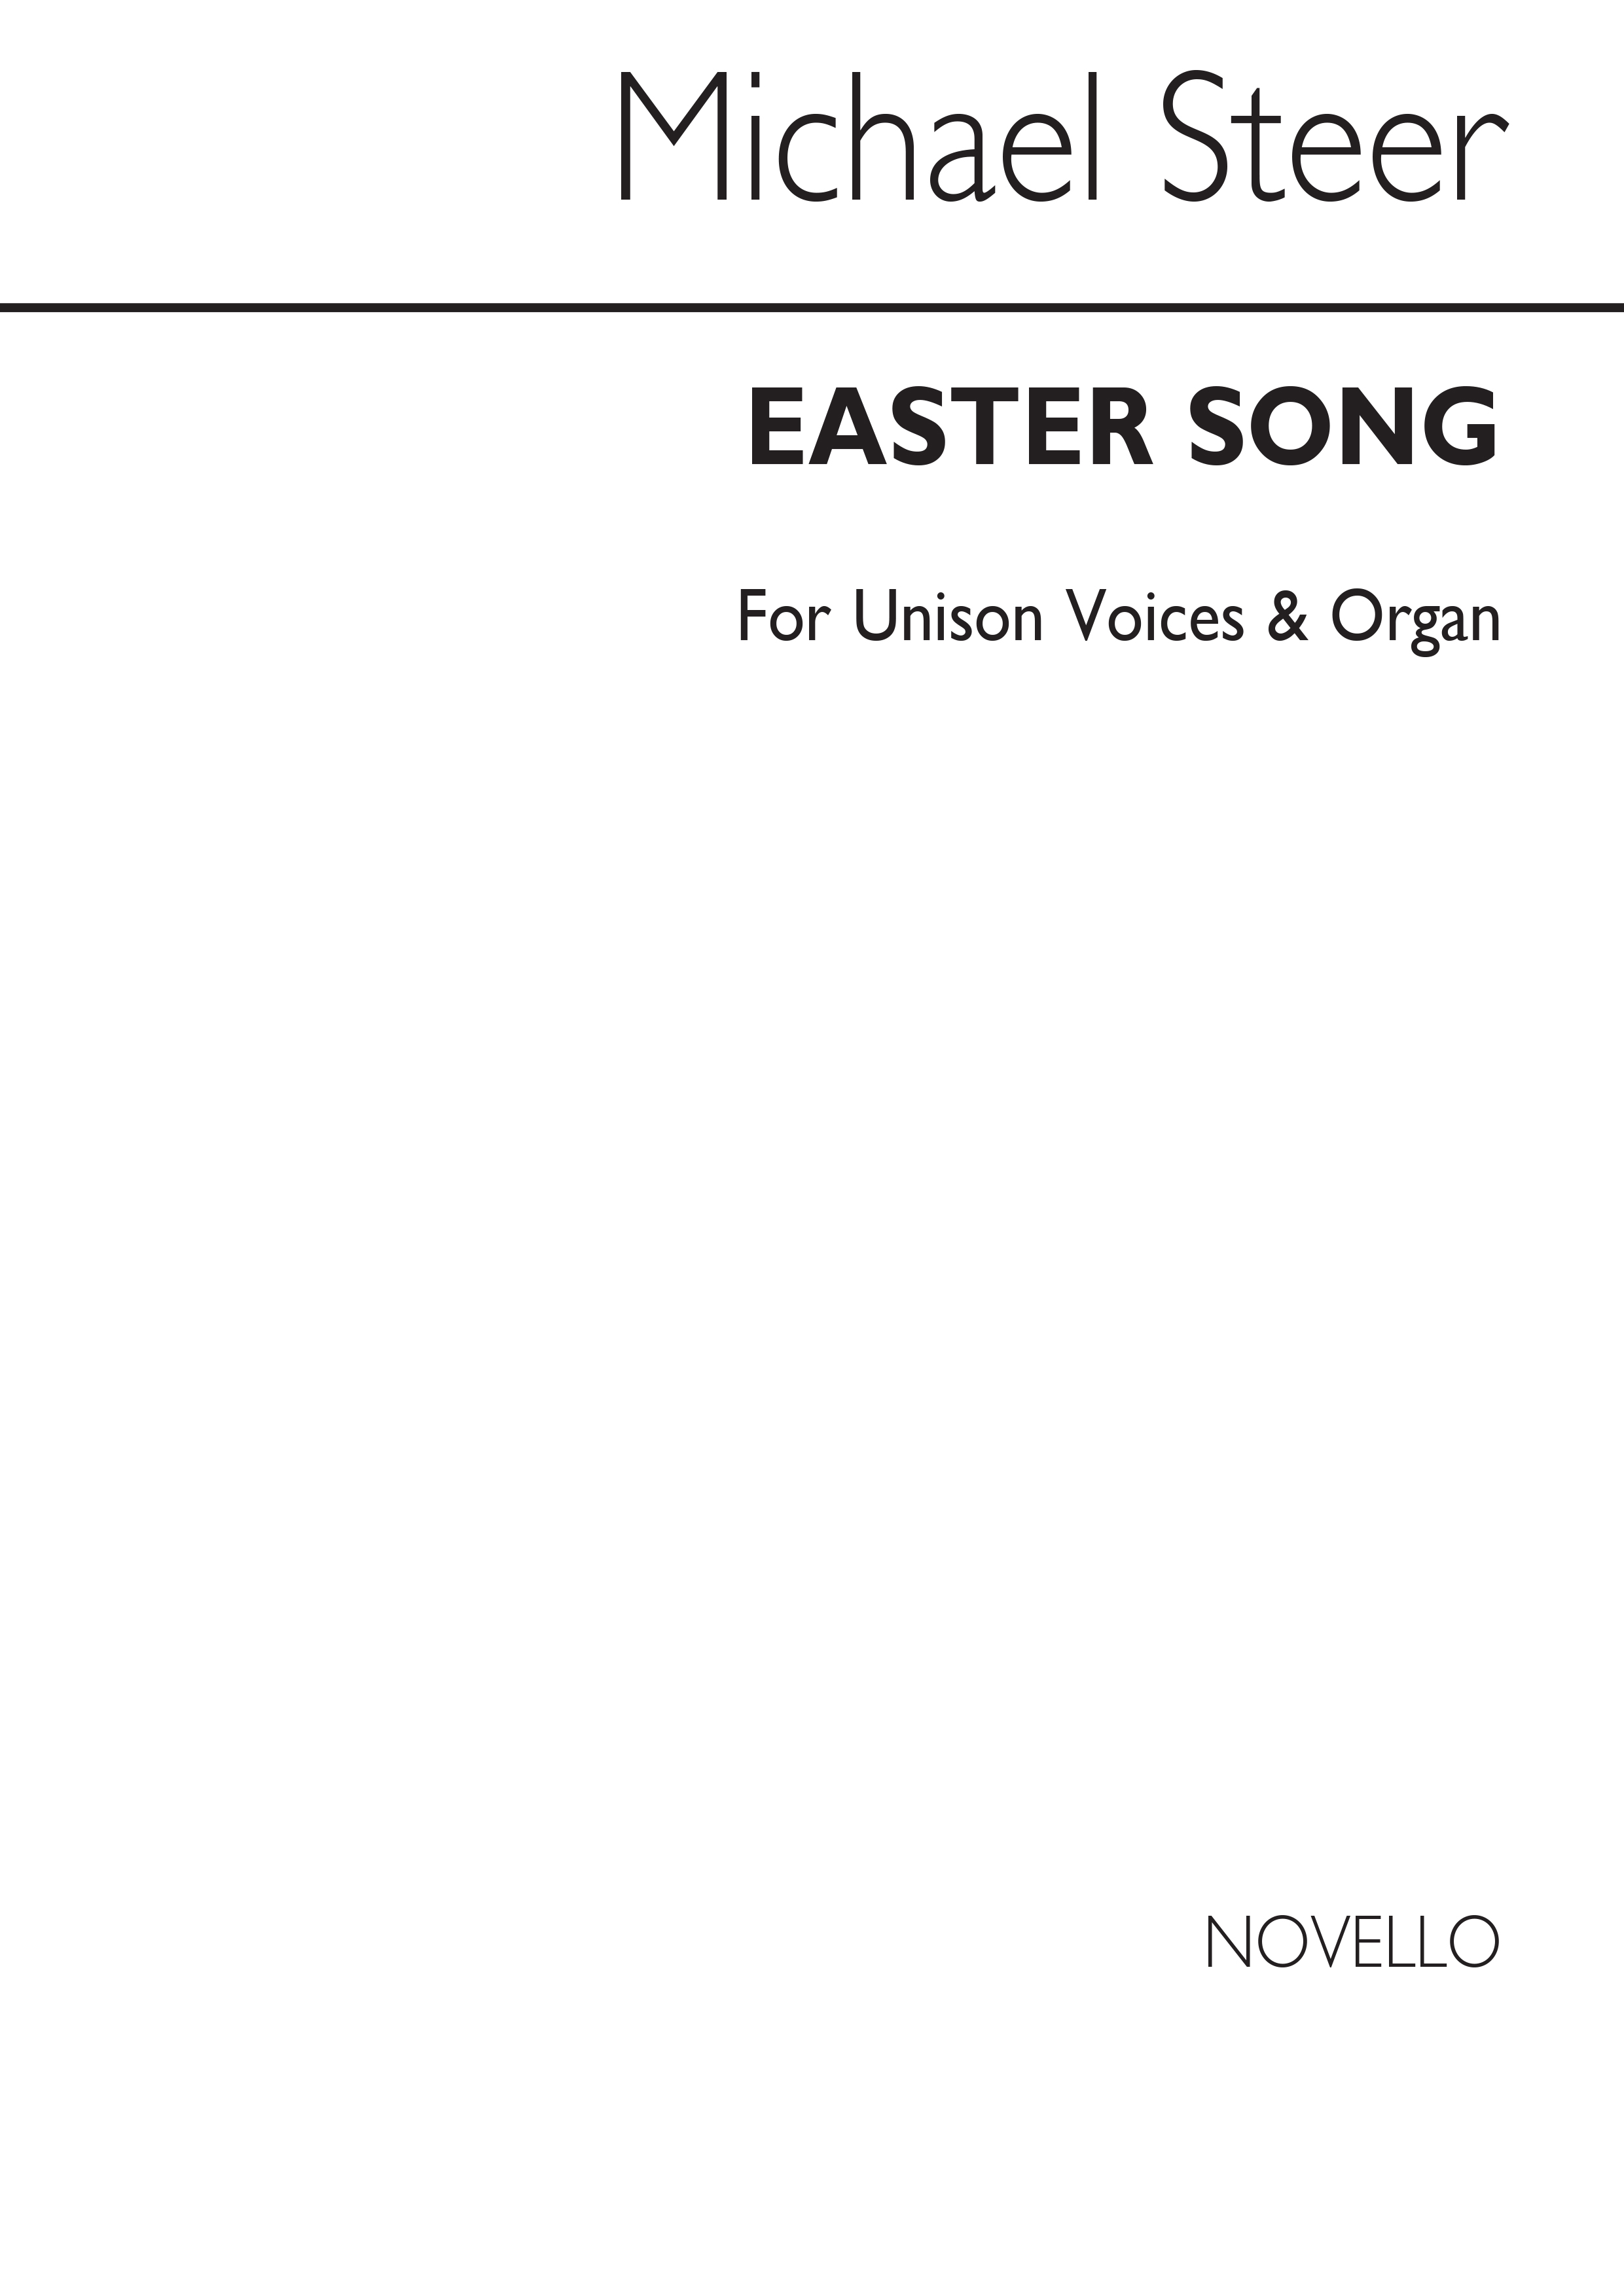 Steer: Easter Song for Unison Voices